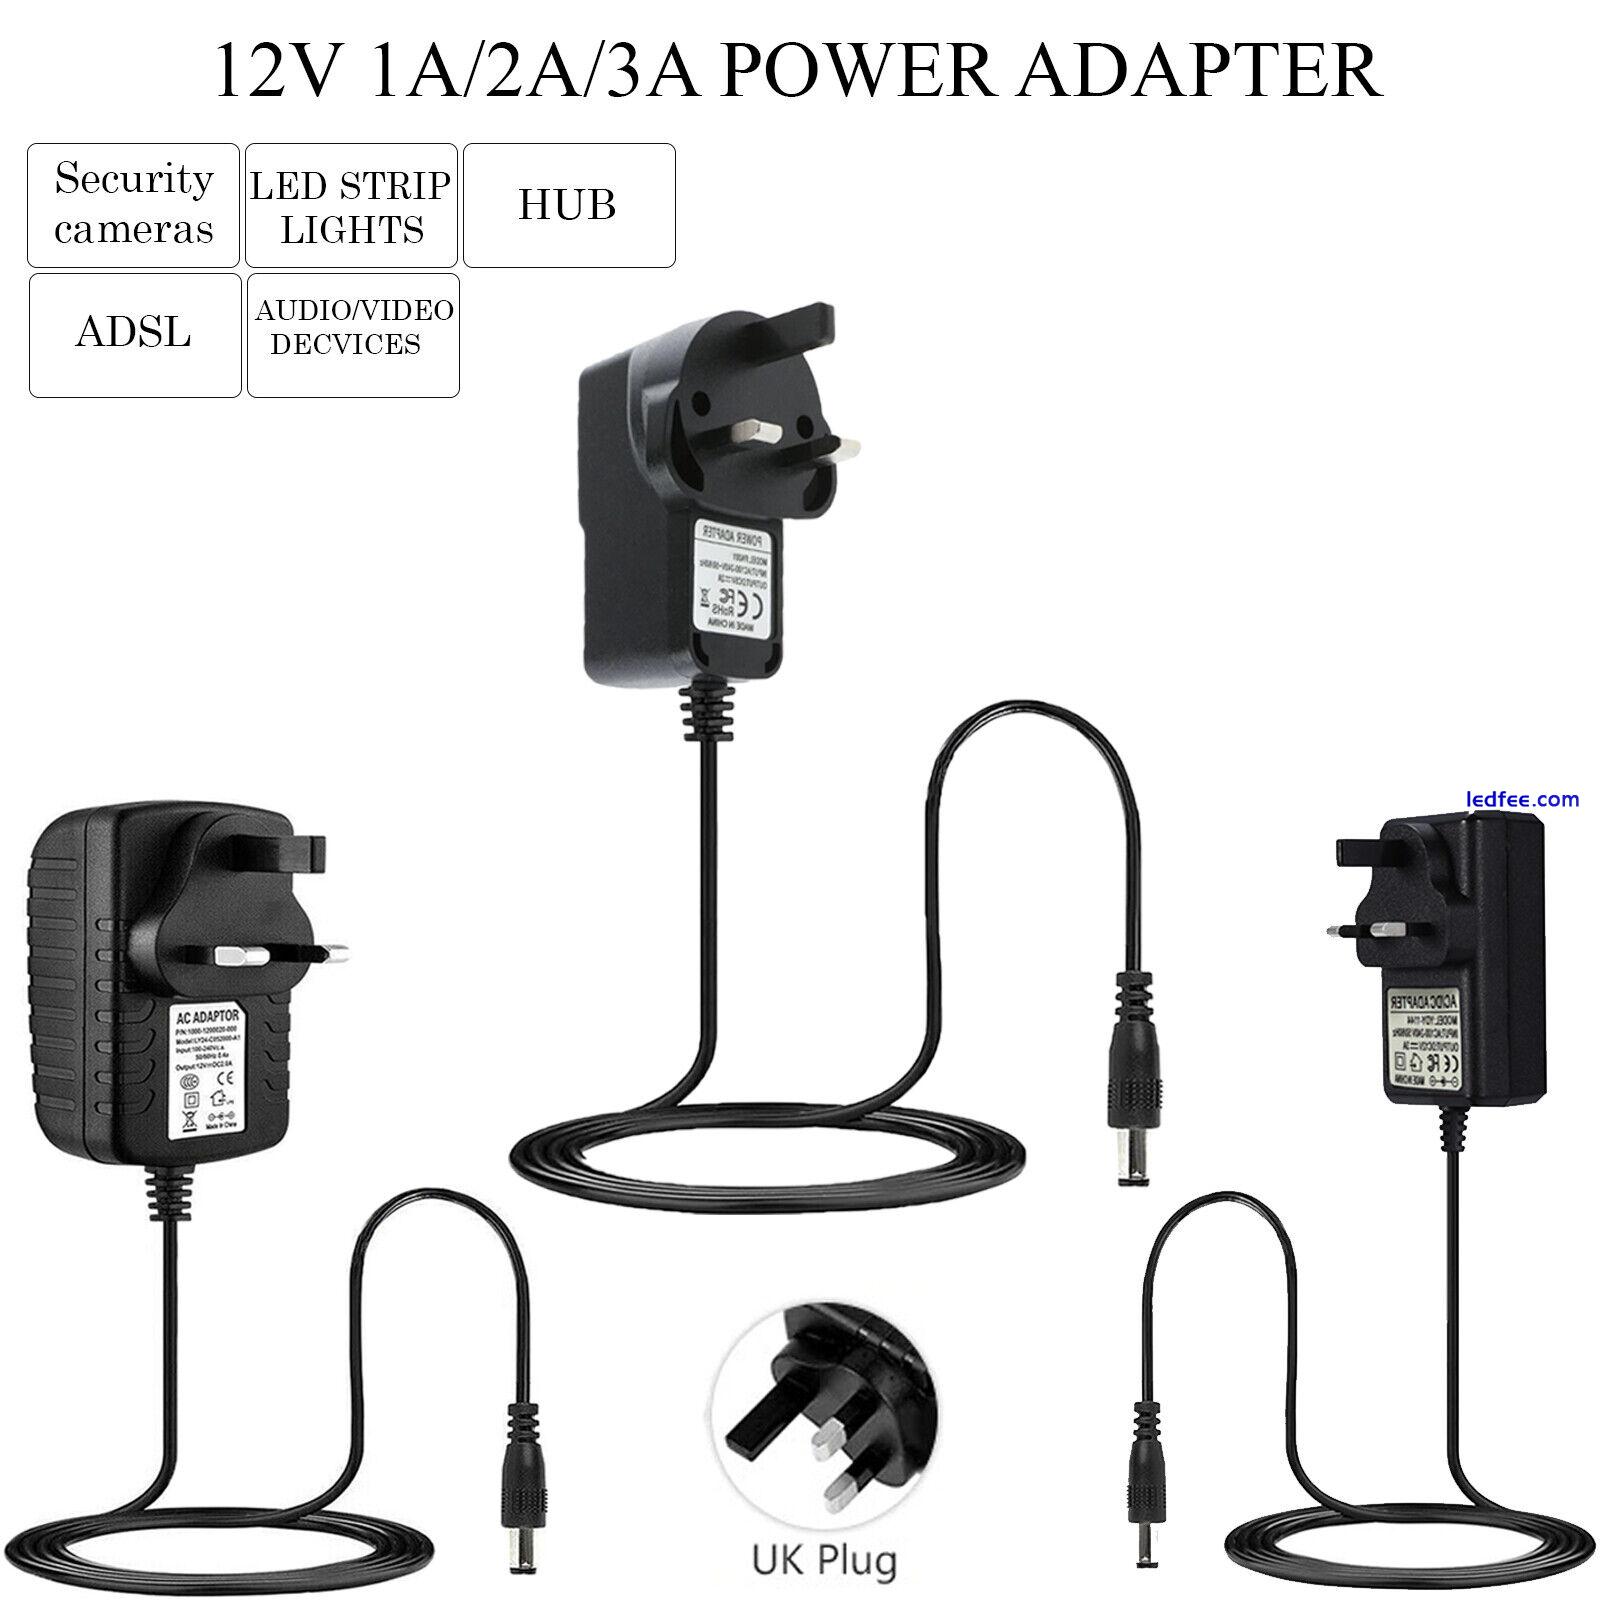 AC DC 12V 1A/2A/3A POWER SUPPLY ADAPTER CHARGER FOR CAMERA LED STRIP LIGHT CCTV 0 